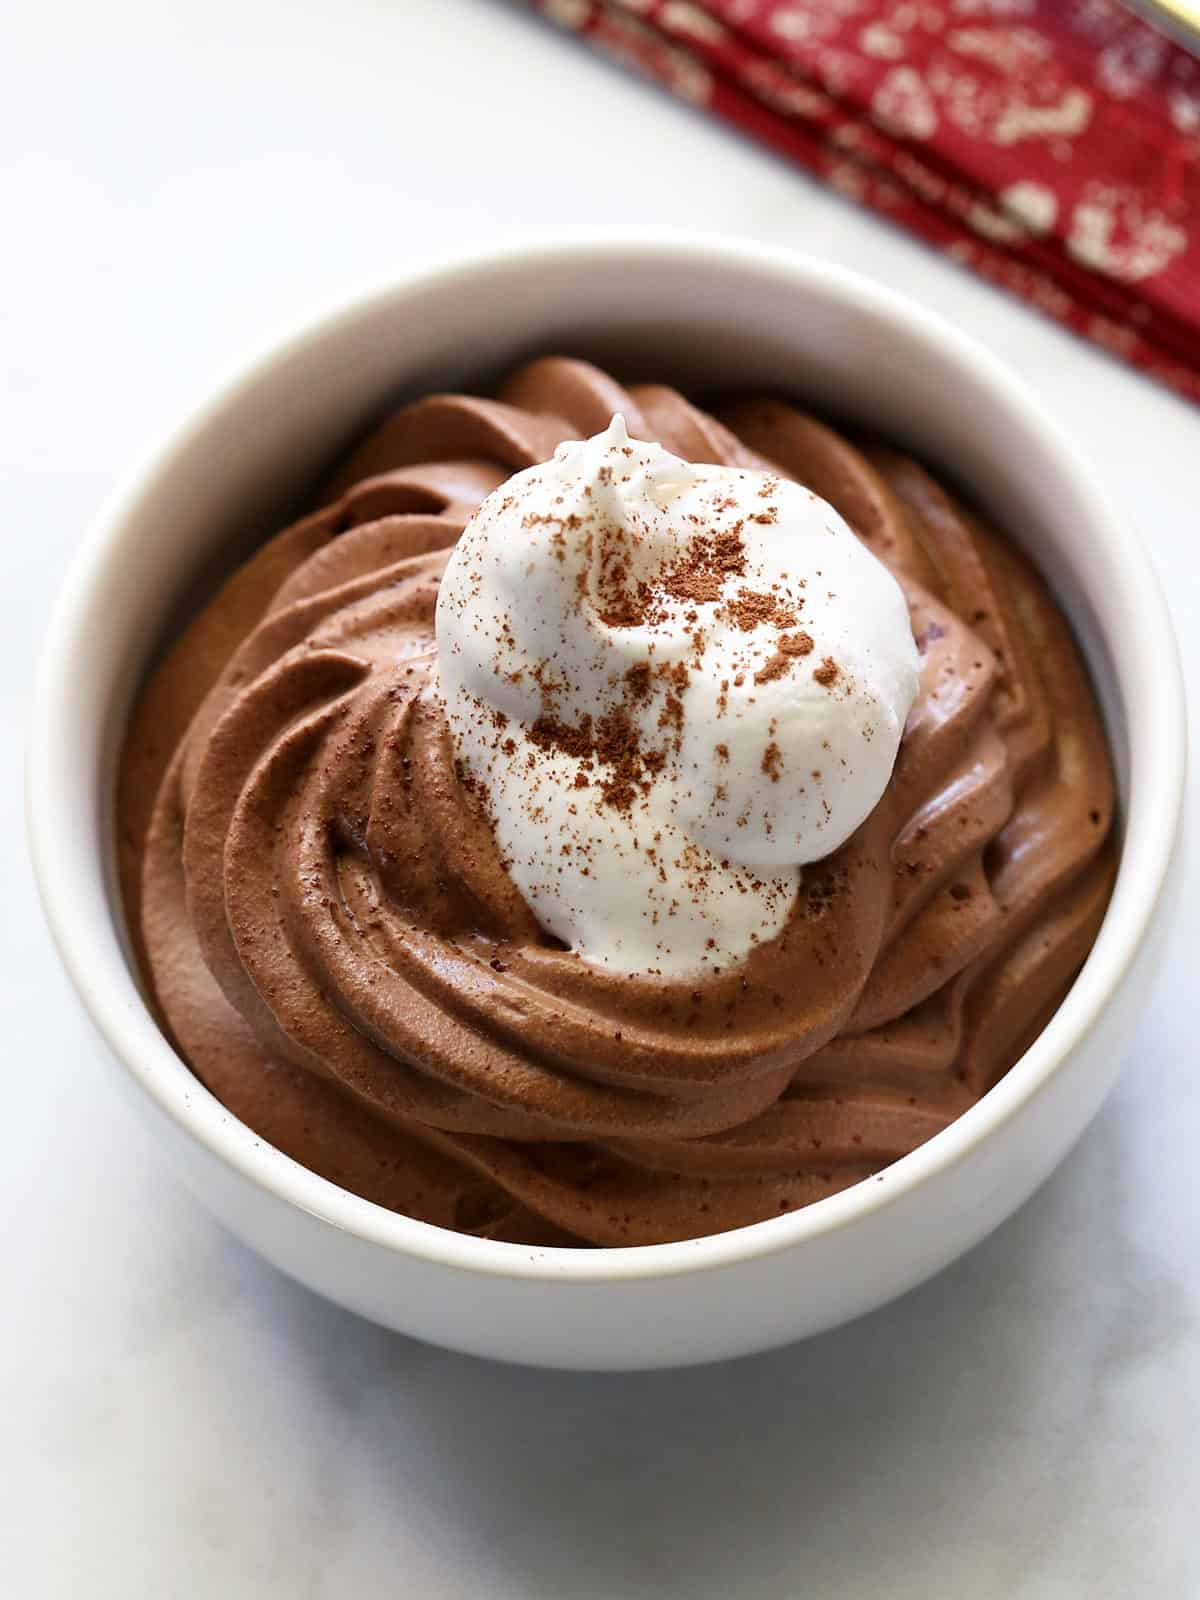 Keto chocolate mousse is served in a white bowl. 